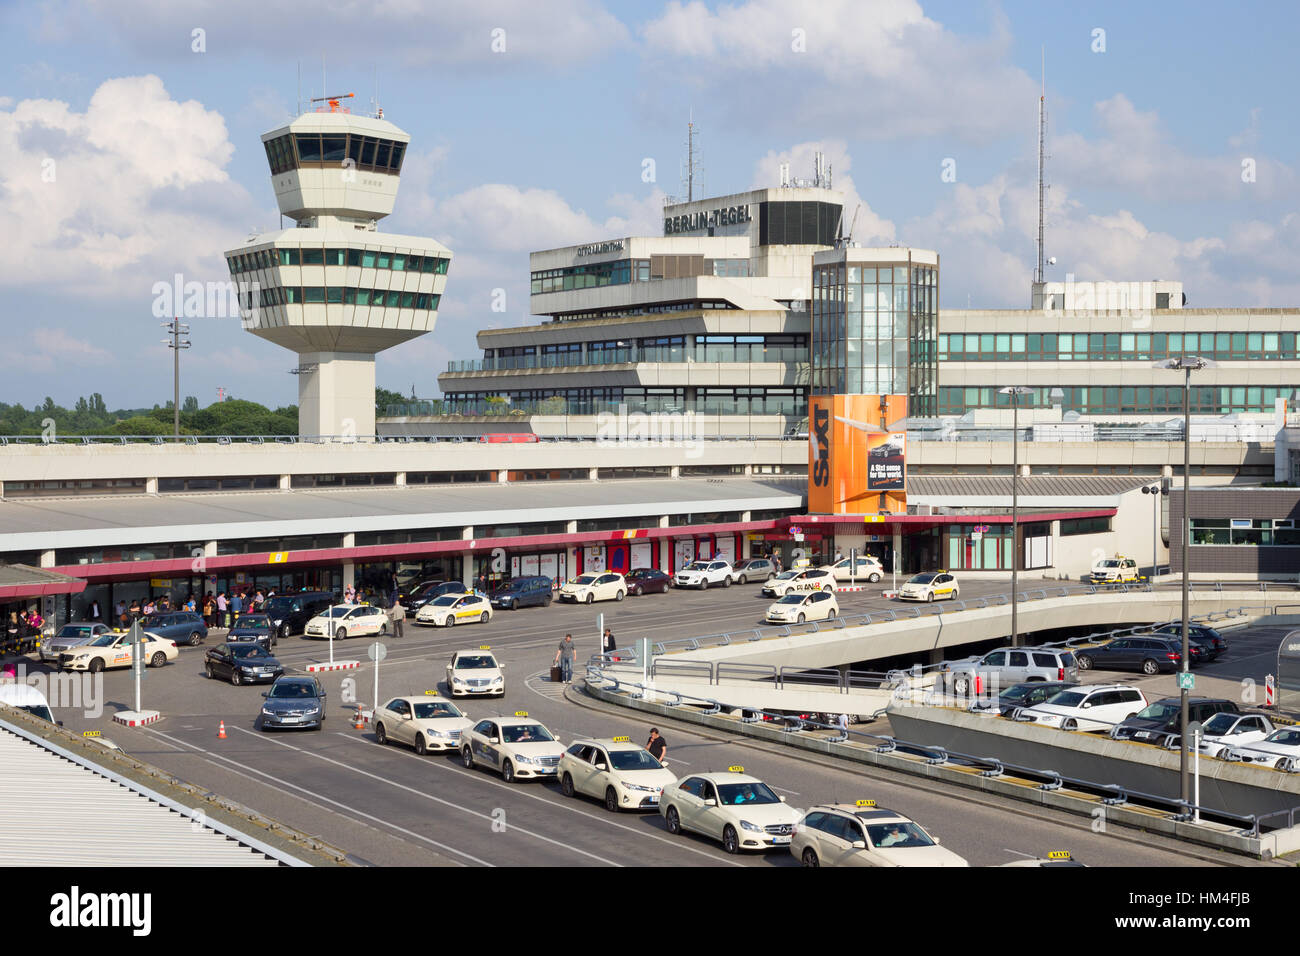 BERLIN - JUN 1, 2016: Taxi's in front of the airport terminal of Berlin-Tegel airport. This airport is the main international airport of Berlin. Stock Photo